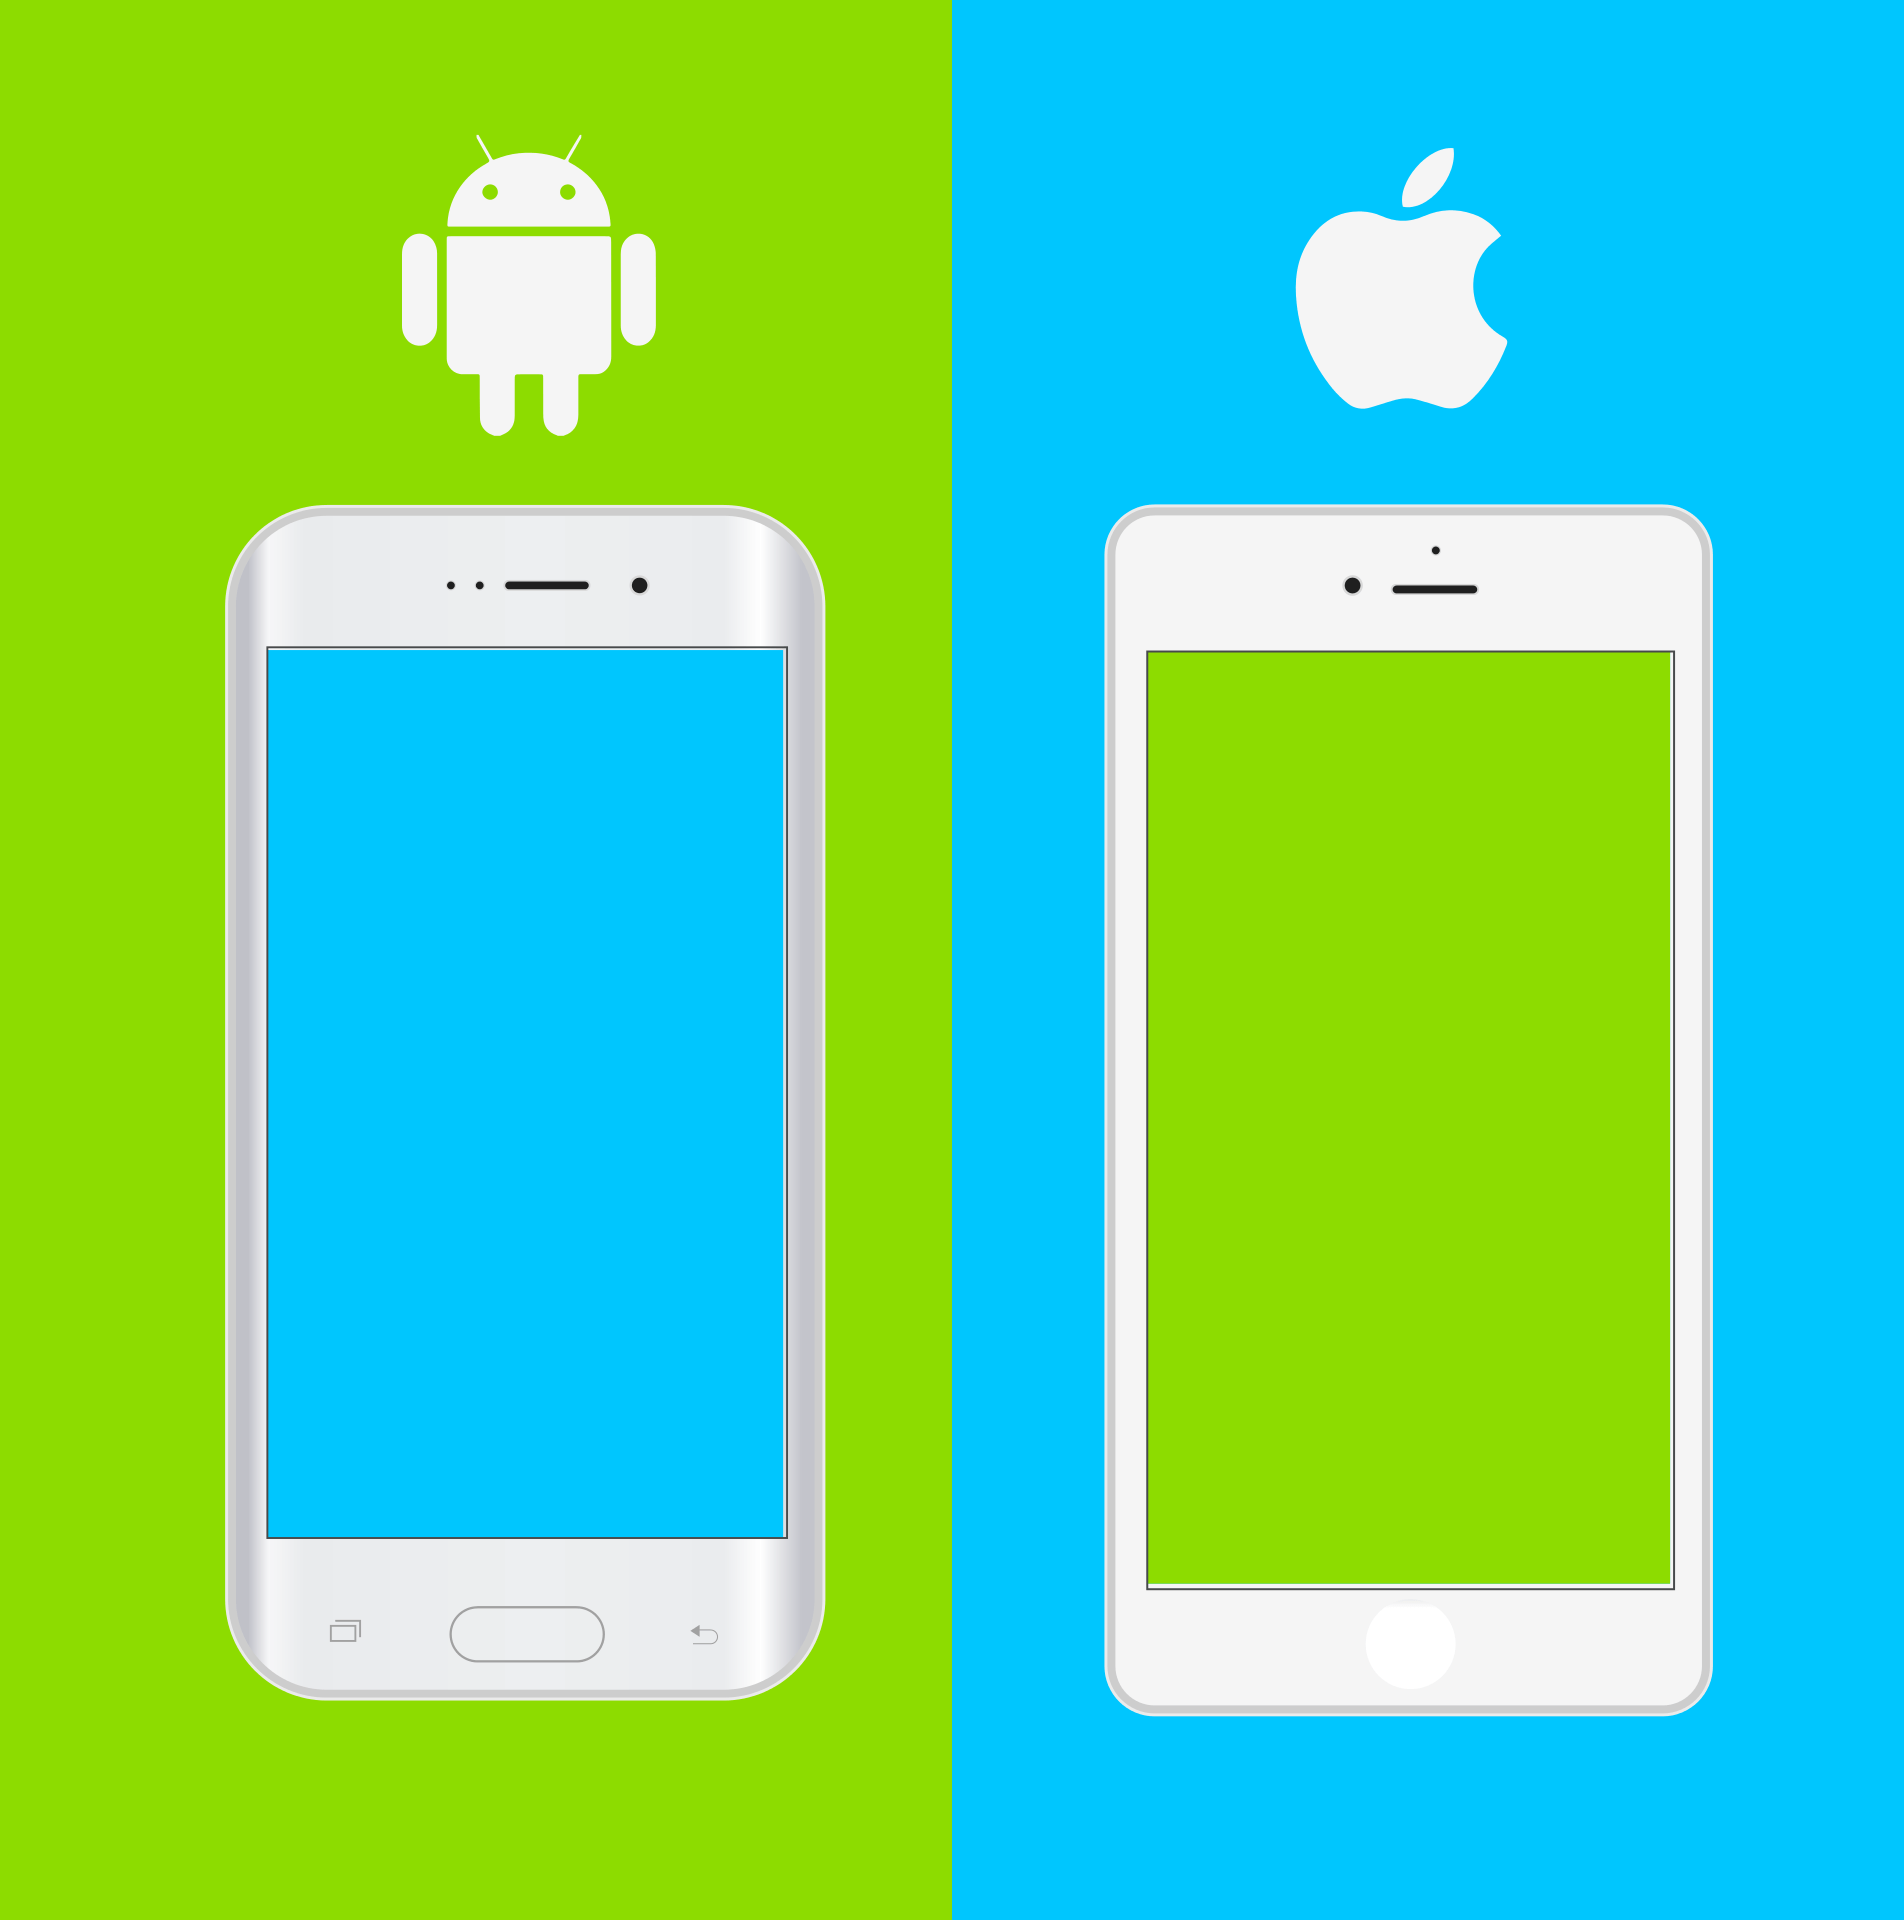 Android or iOS?